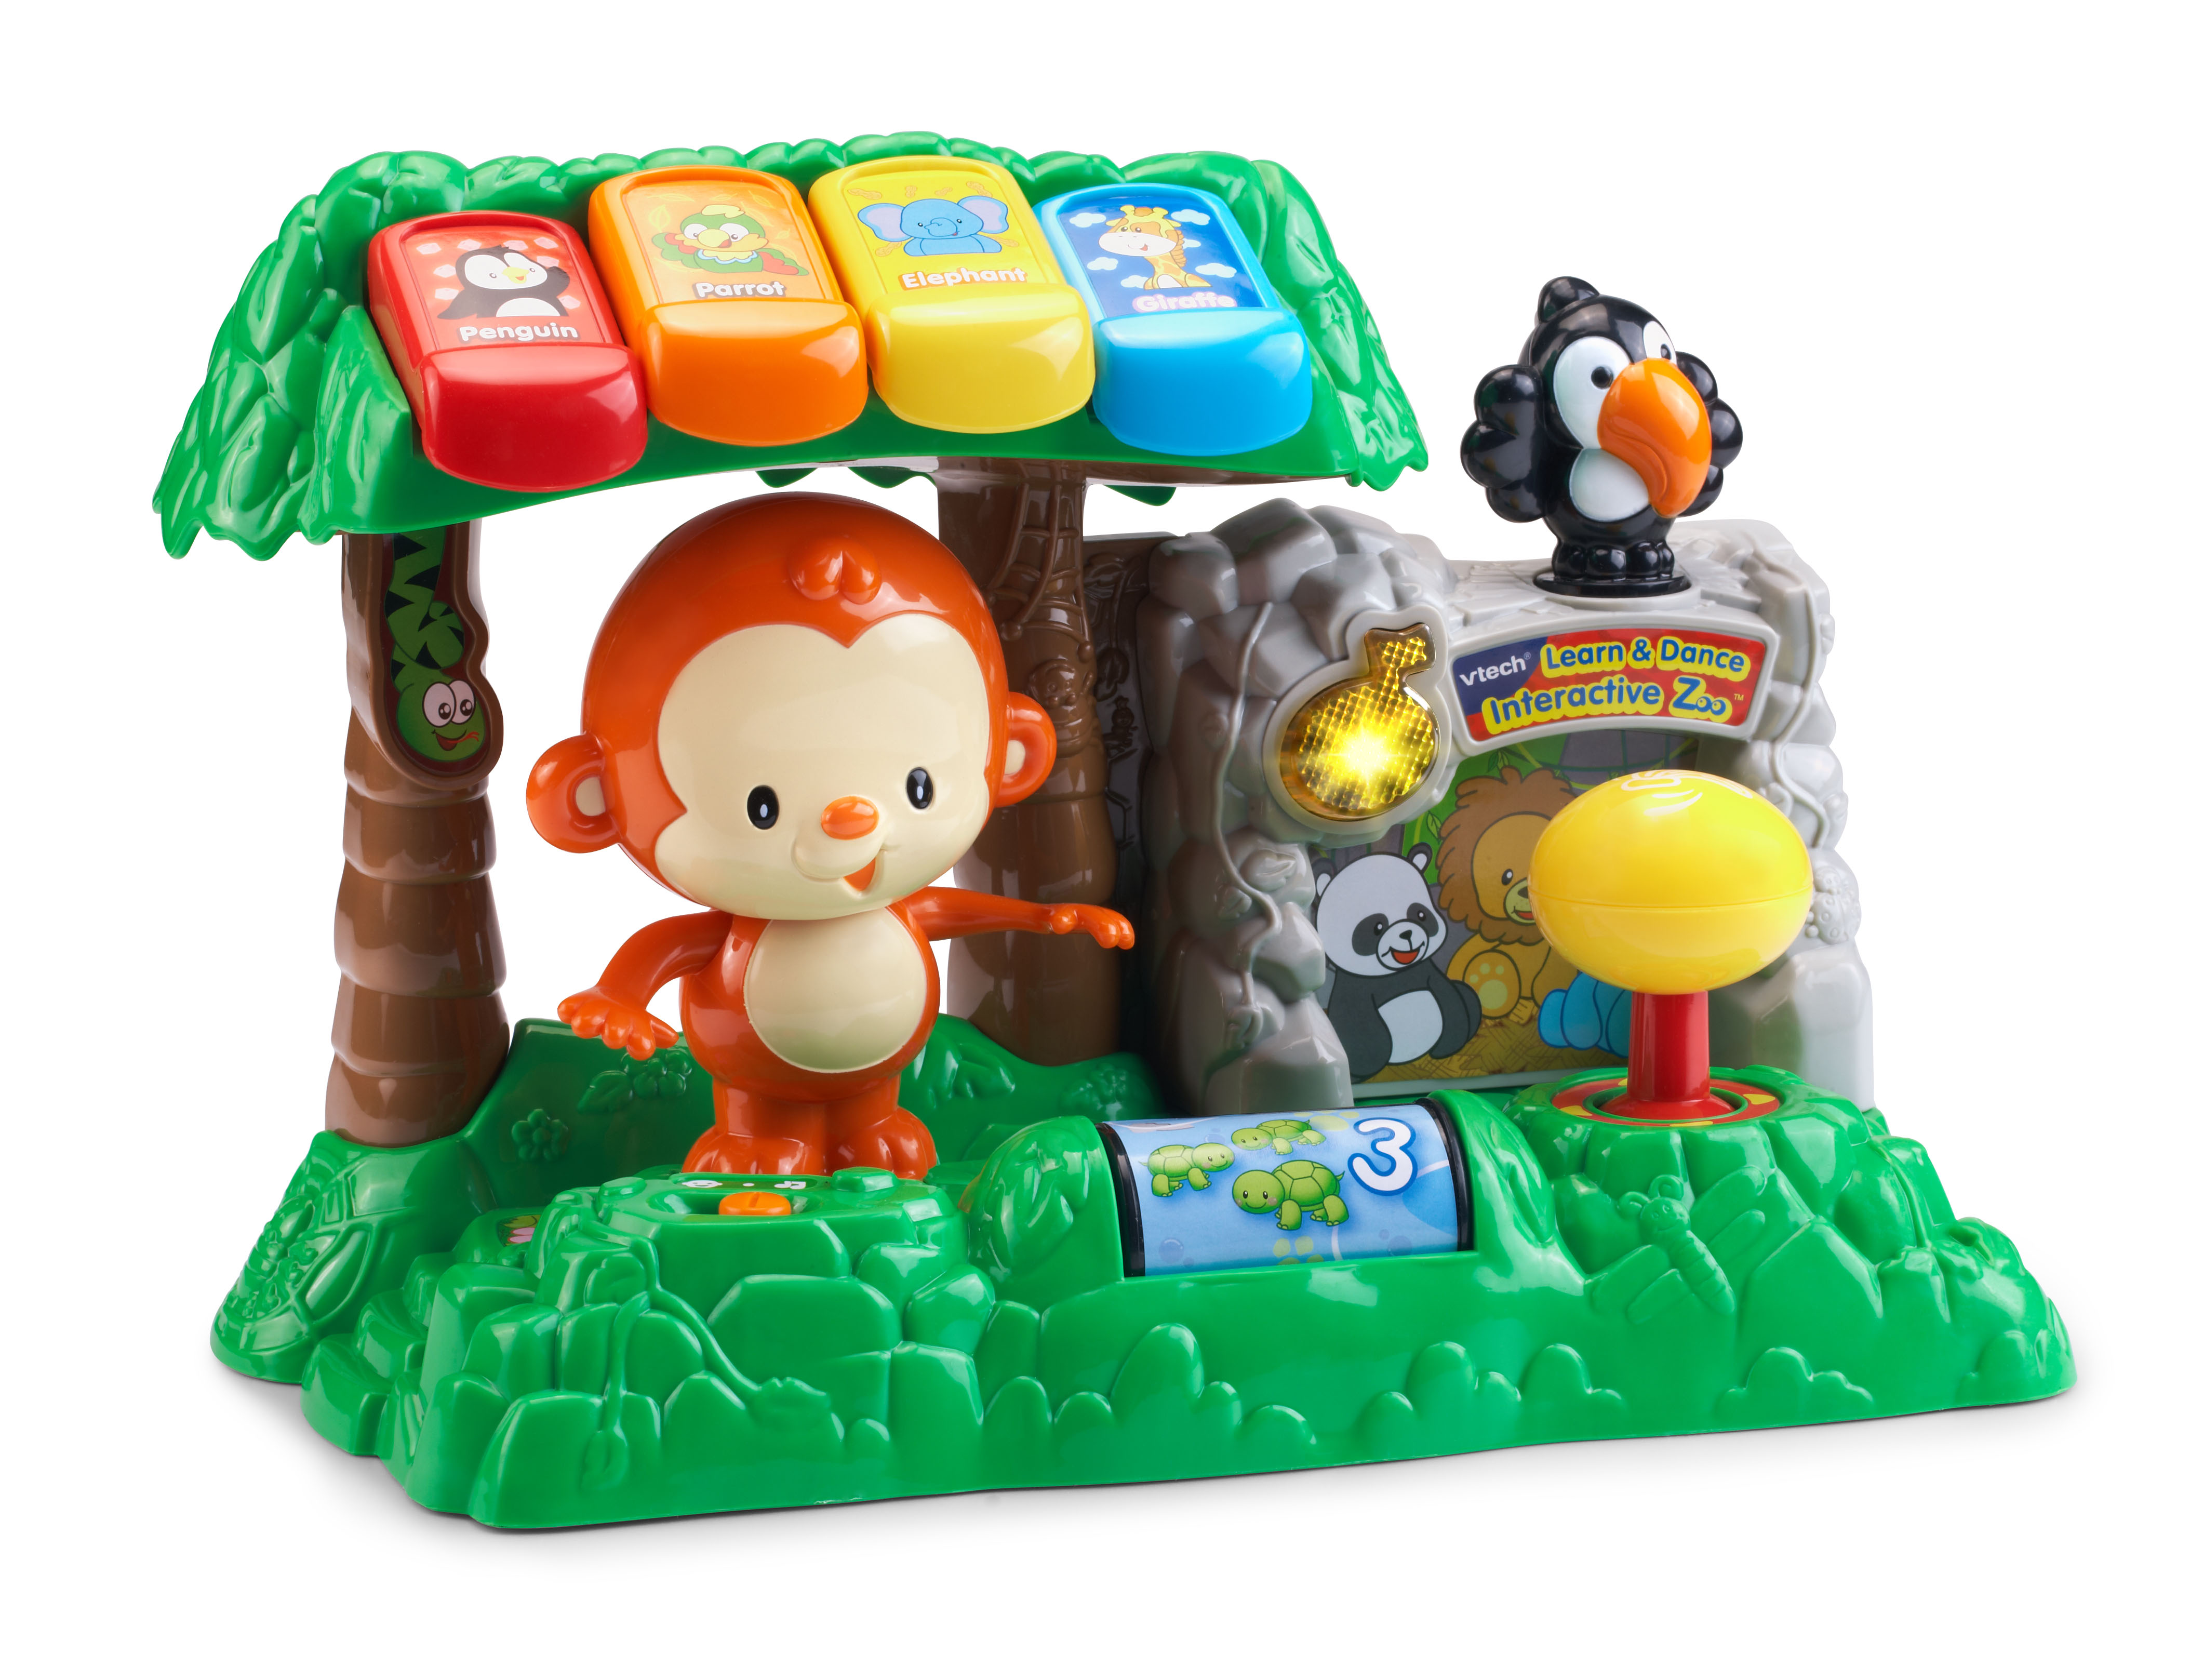 VTech Learn and Dance Interactive Zoo, Fun Teaching Toy for Toddlers - image 4 of 6